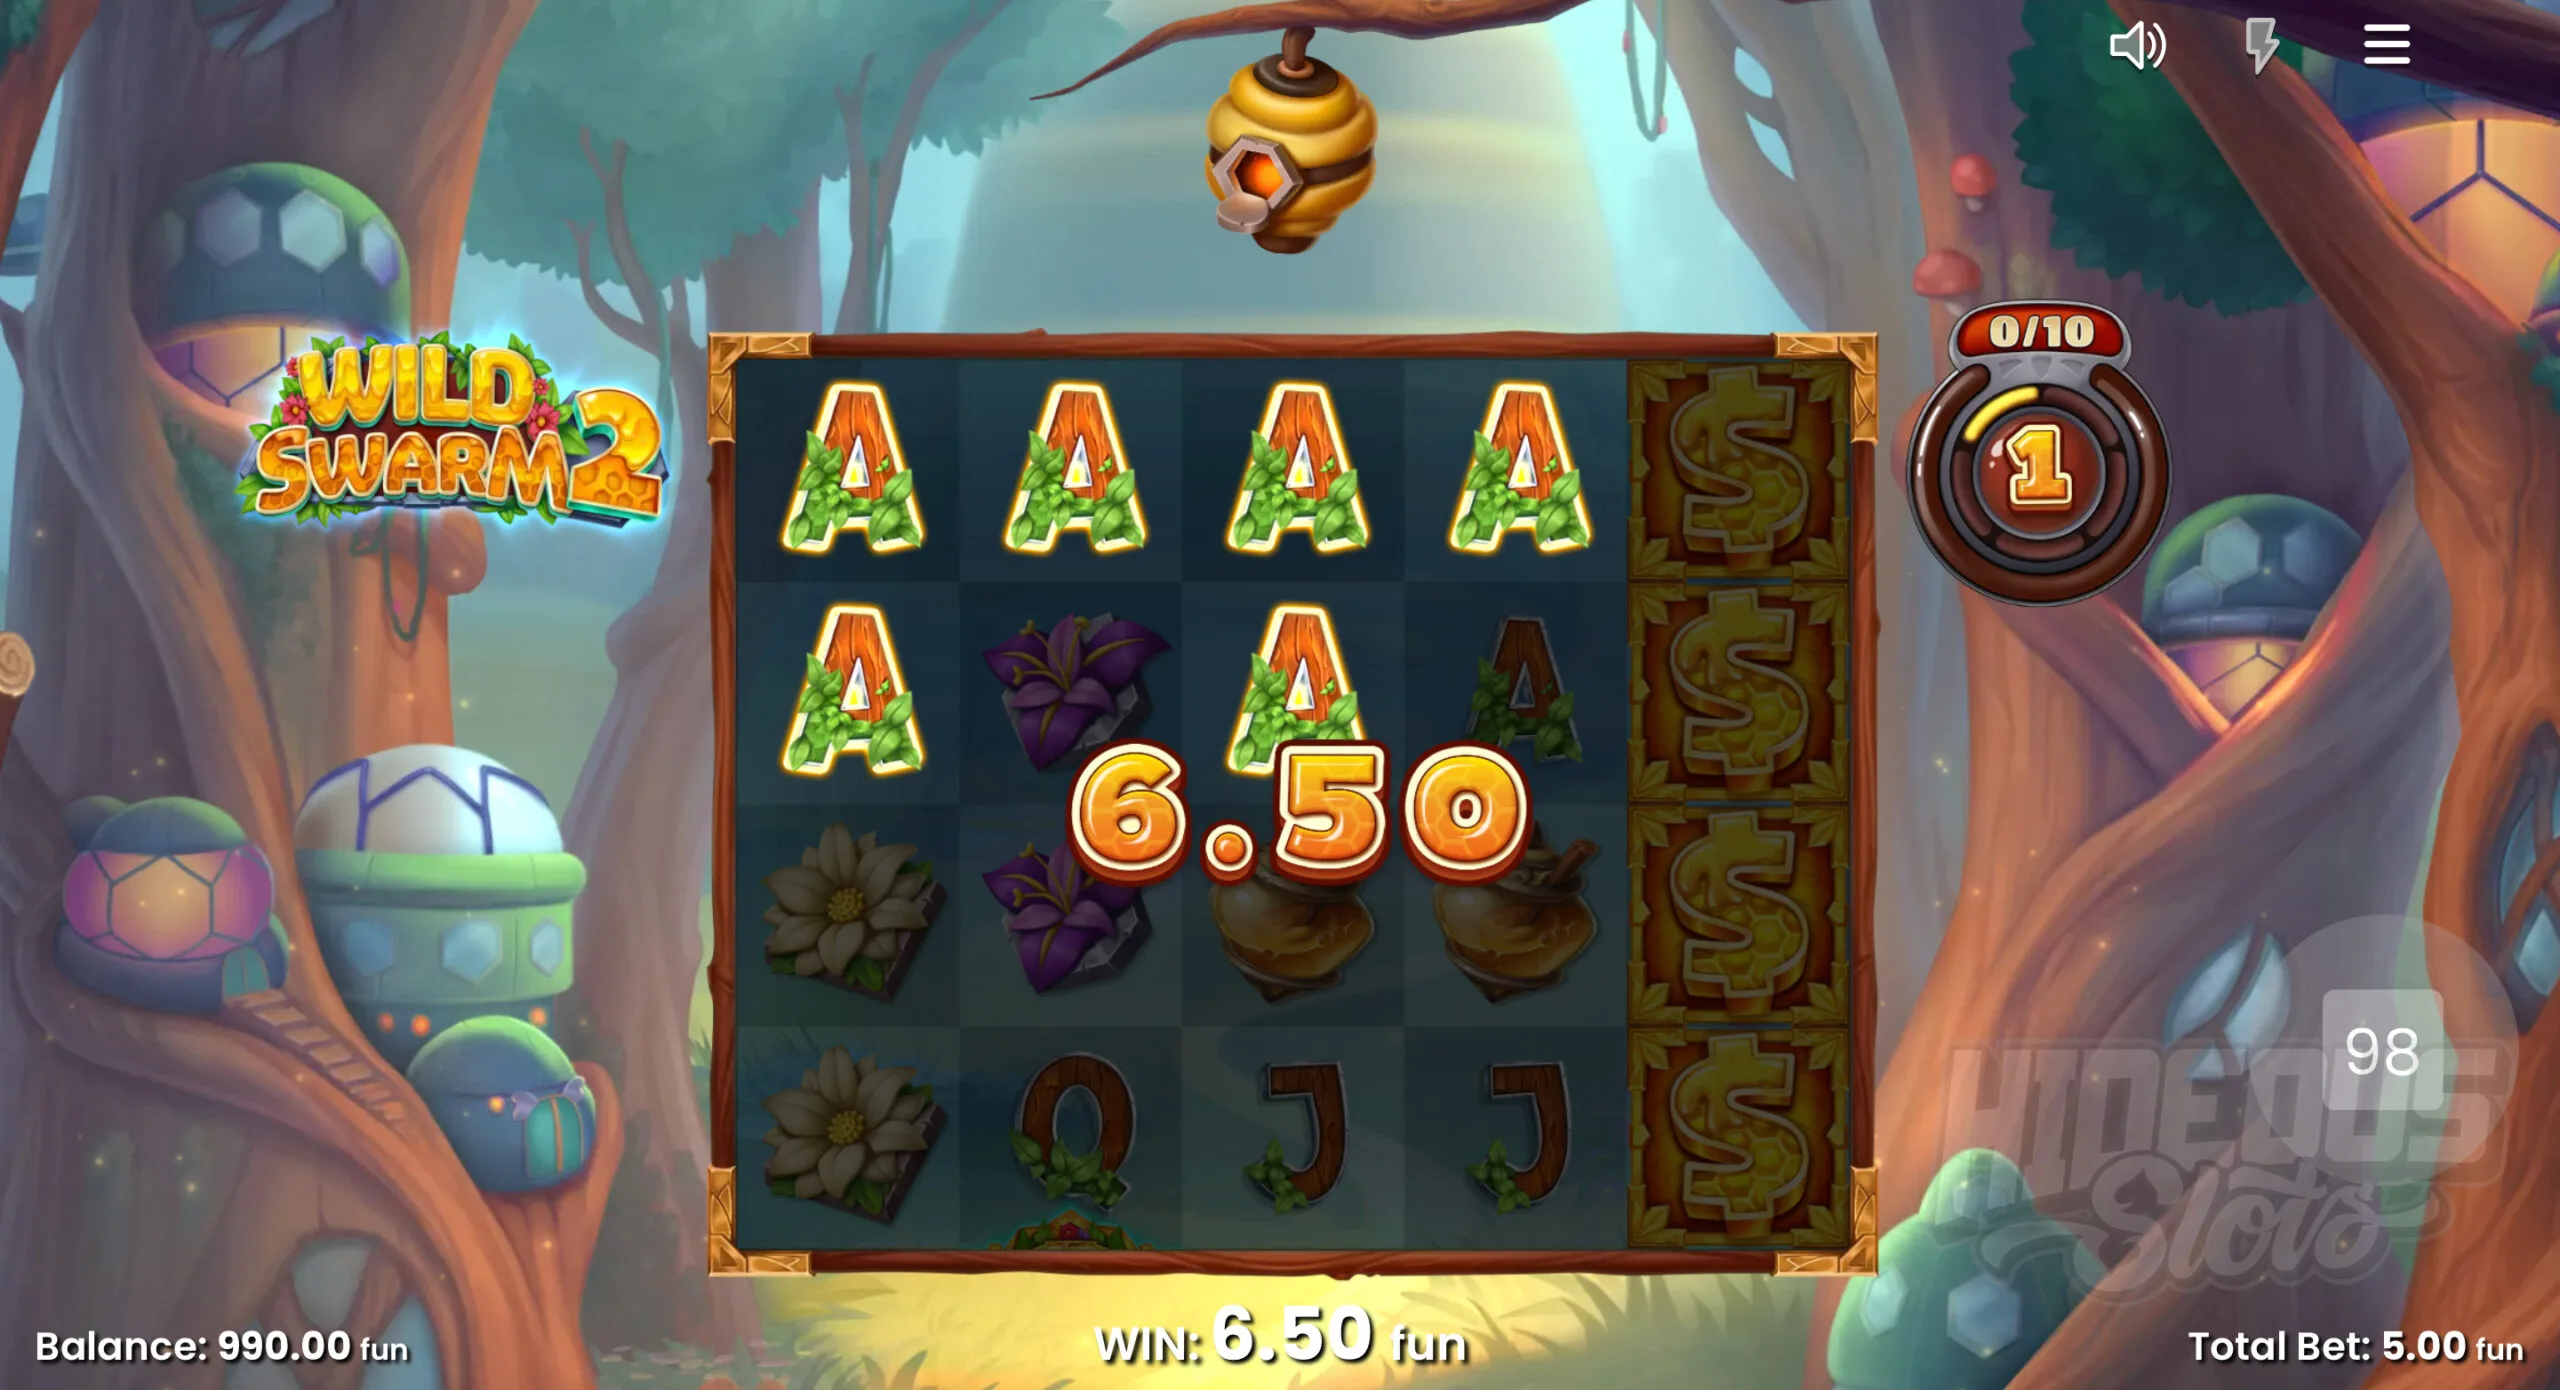 Wild Swarm 2 Offers Players 20 Fixed Win Lines